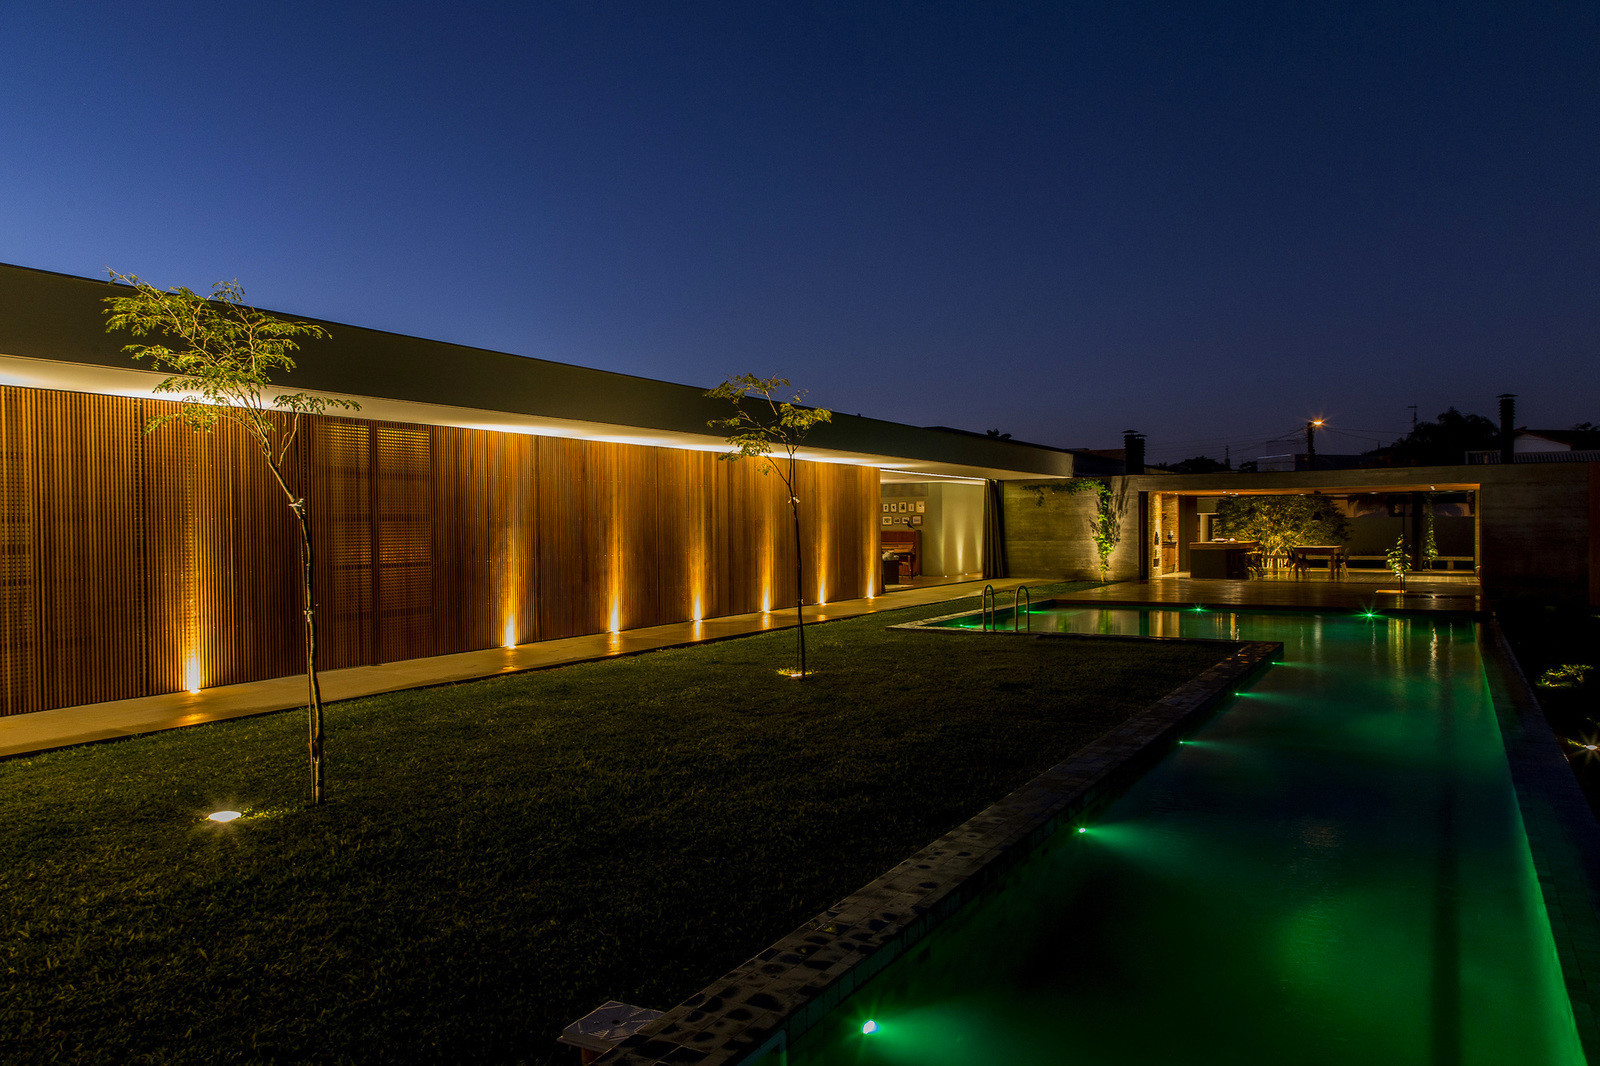 Private house with features of Brazilian modernism